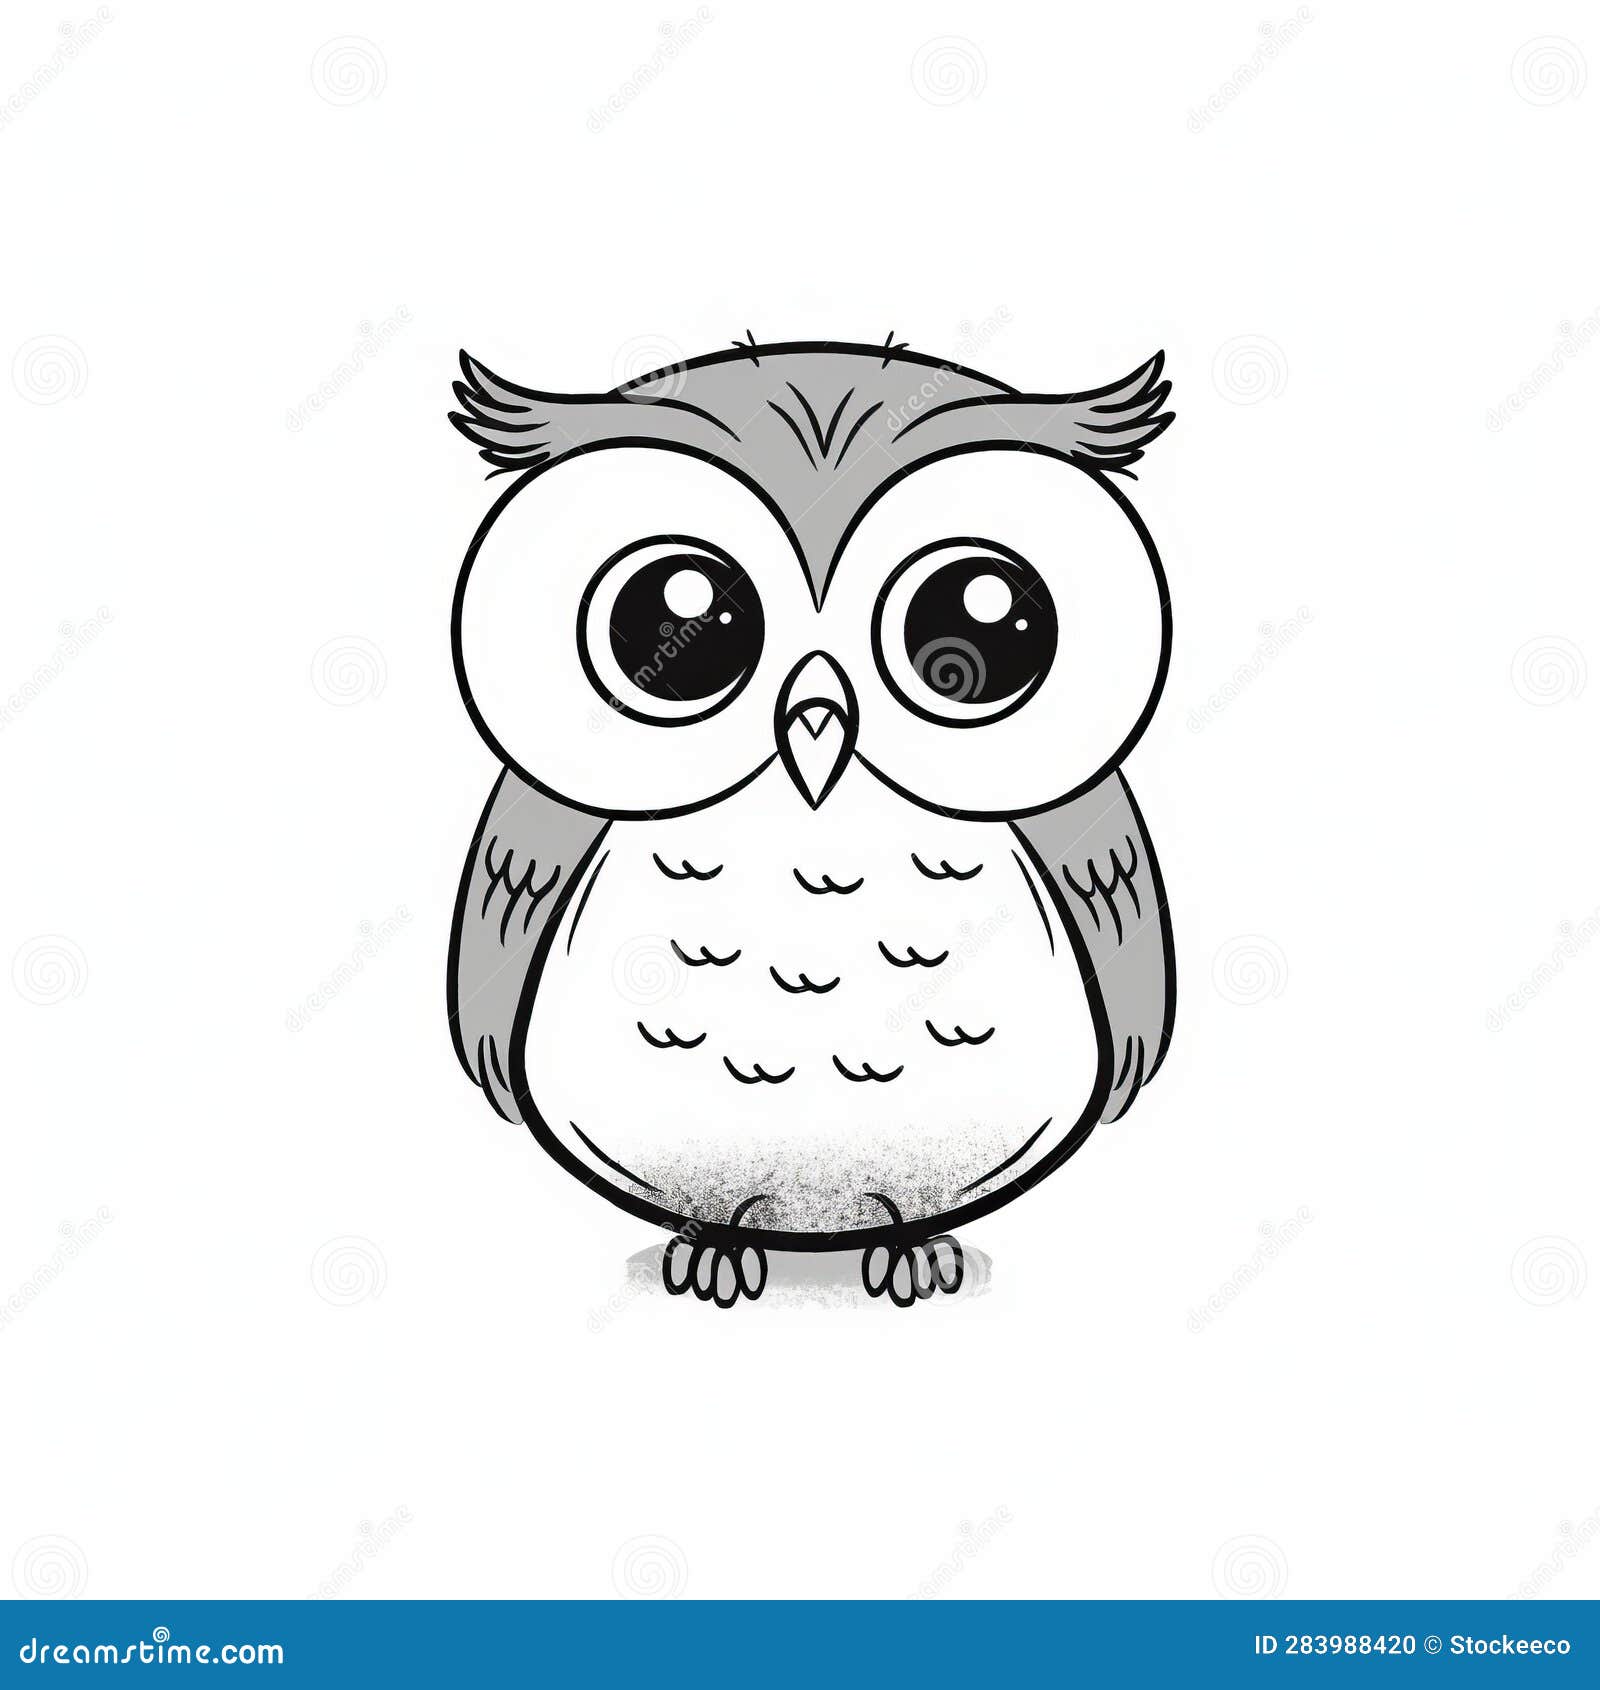 Chromaflutters Cute Owl Drawing Collection - COLORFUL 4